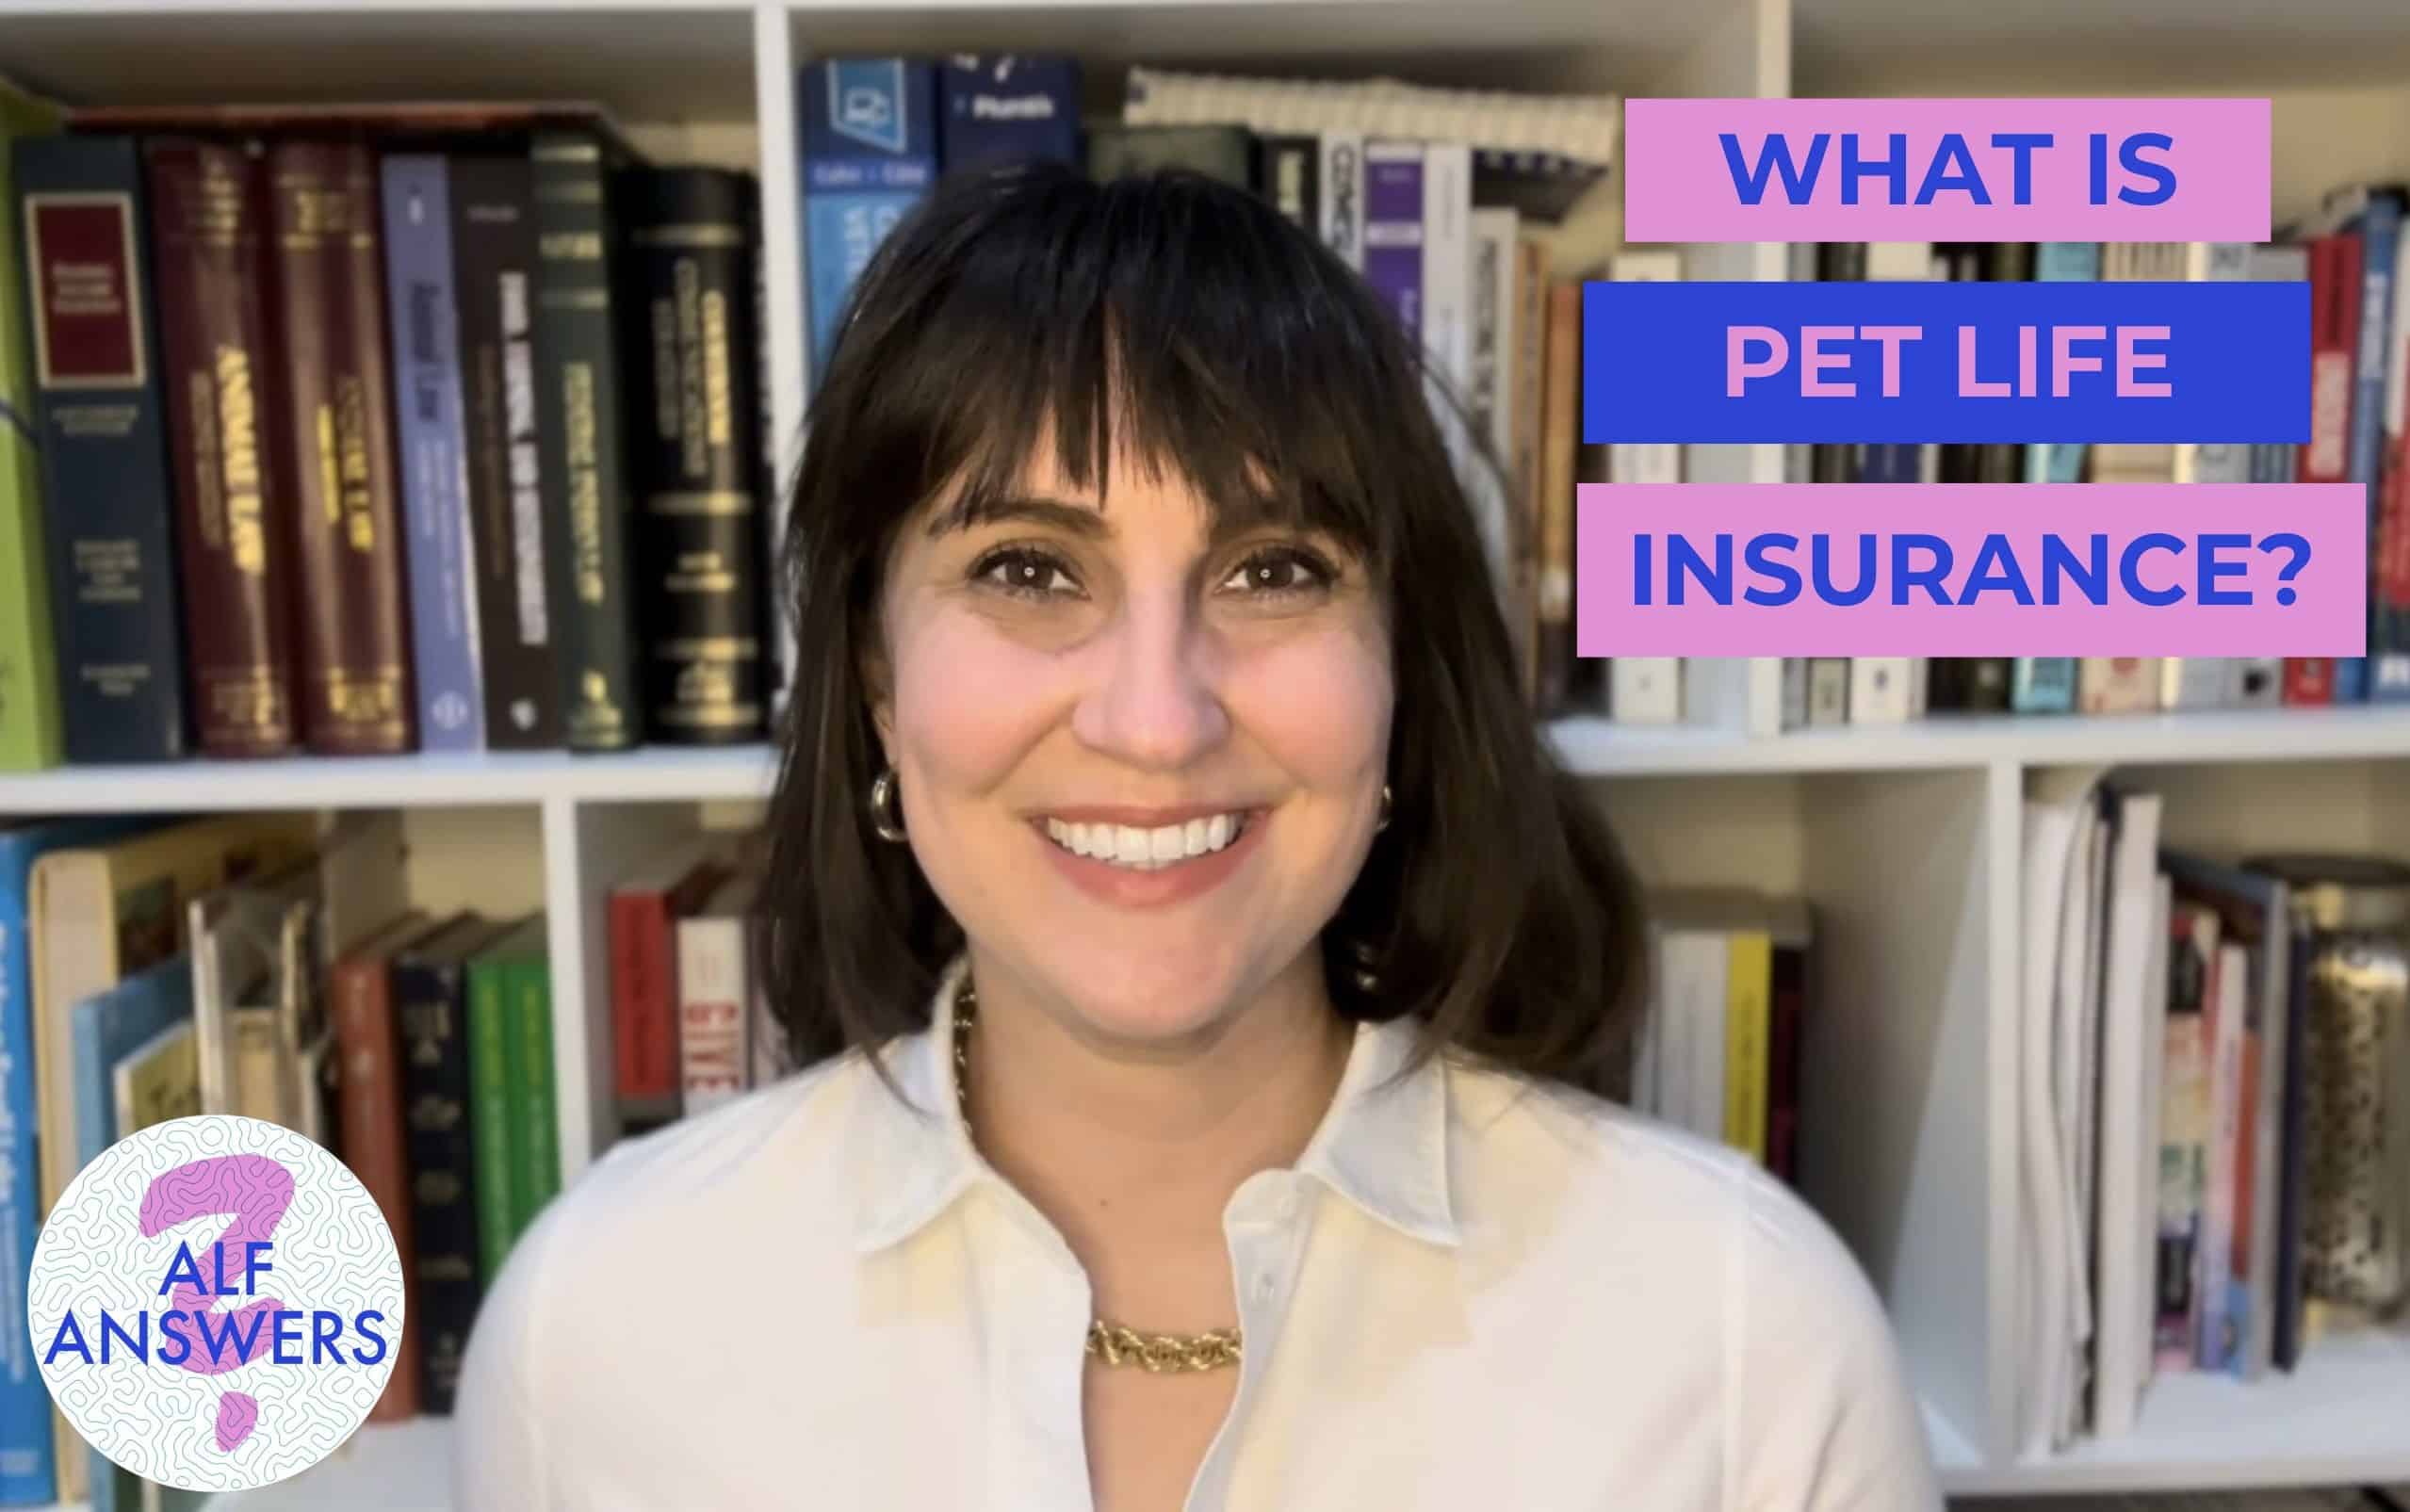 ALF Answers: “What is Pet Life Insurance?”